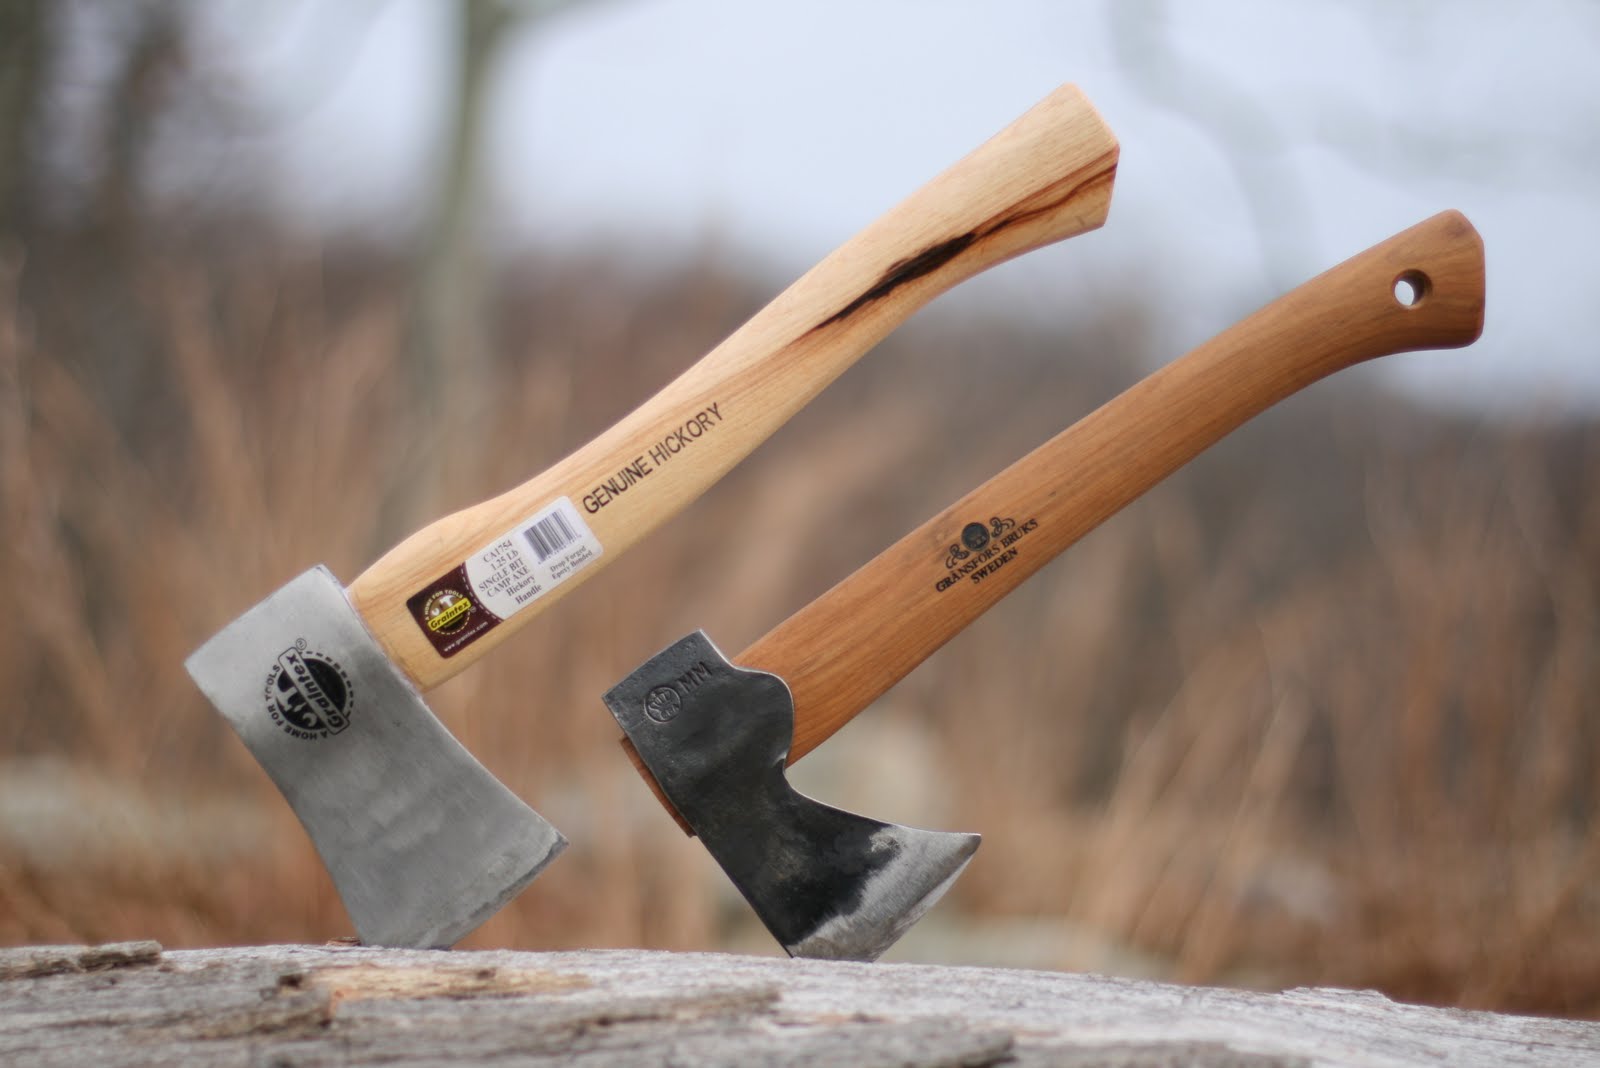 The Graintex hatchet handle is exactly 14 inches, which makes it a bit long...